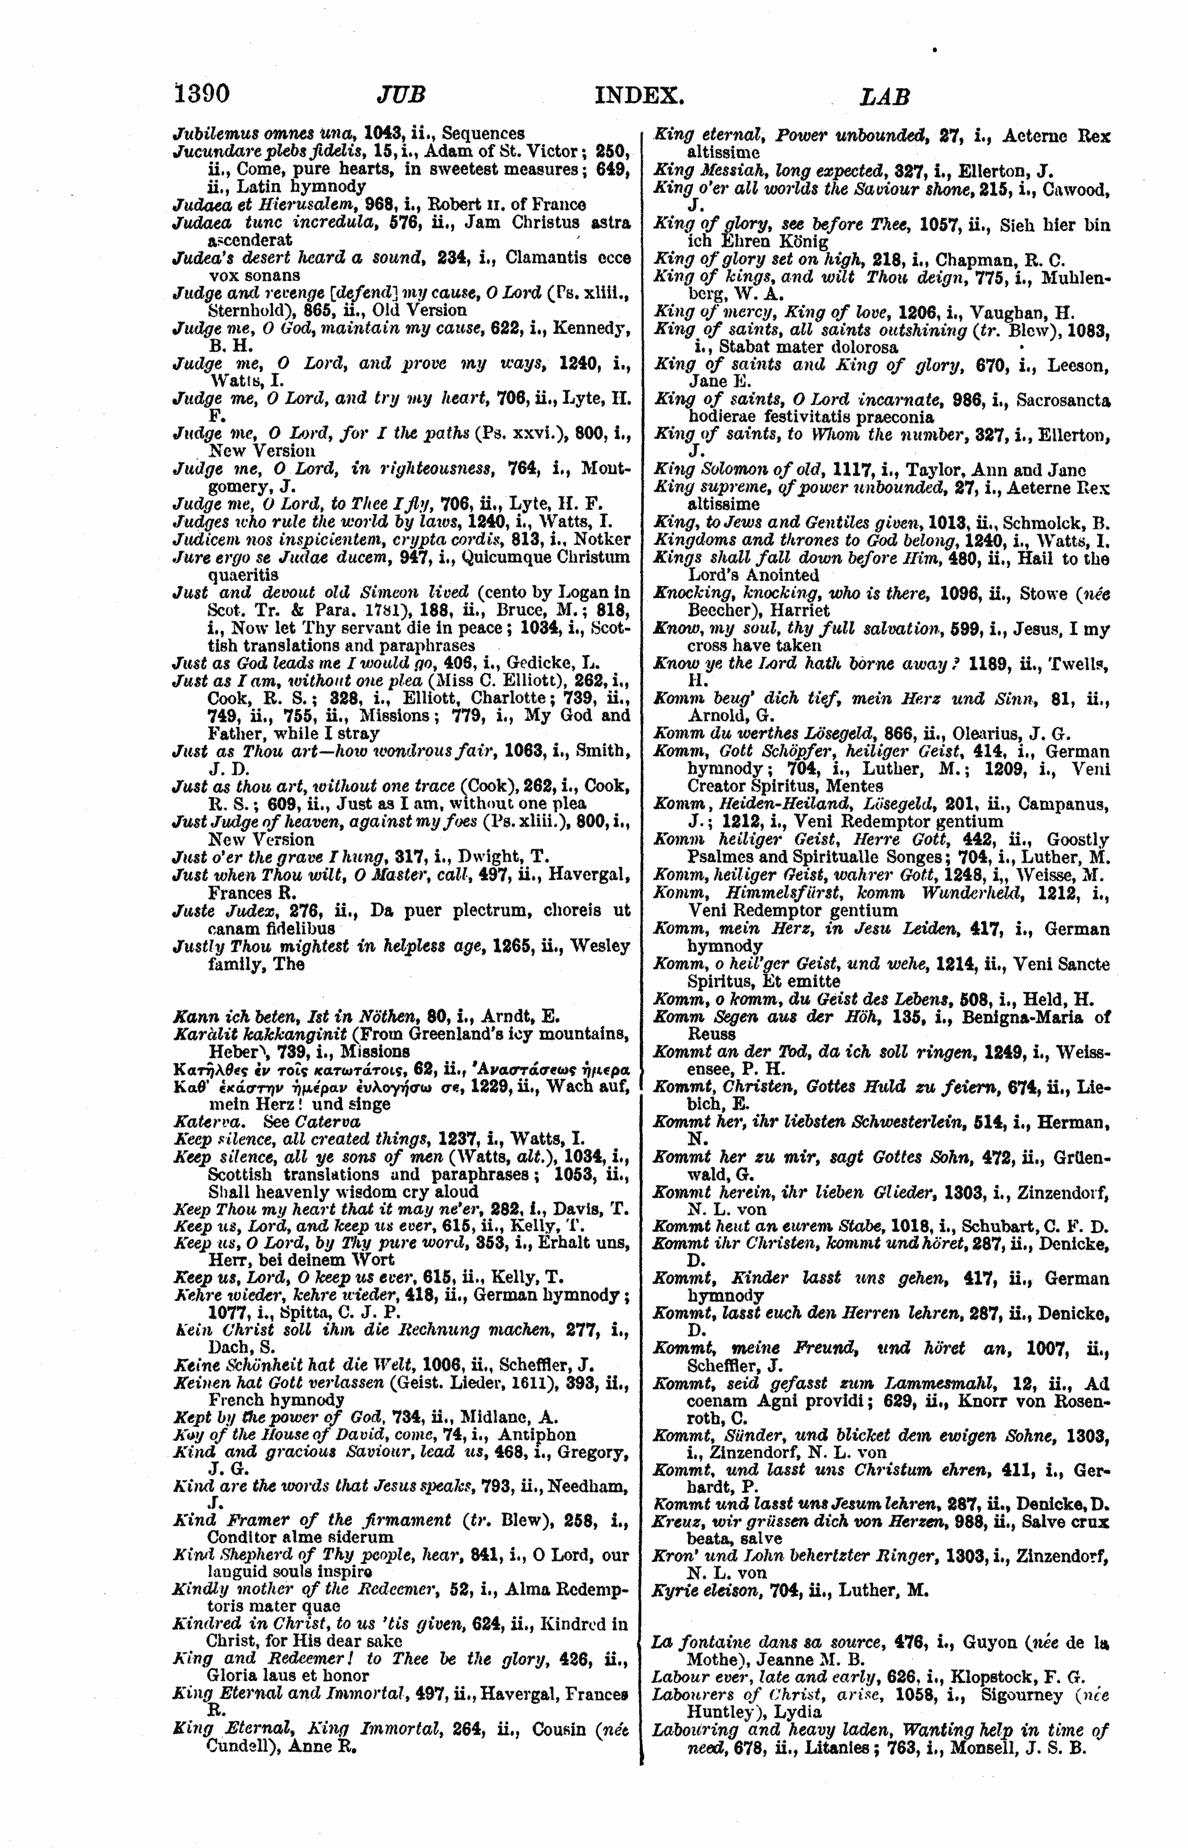 Image of page 1390